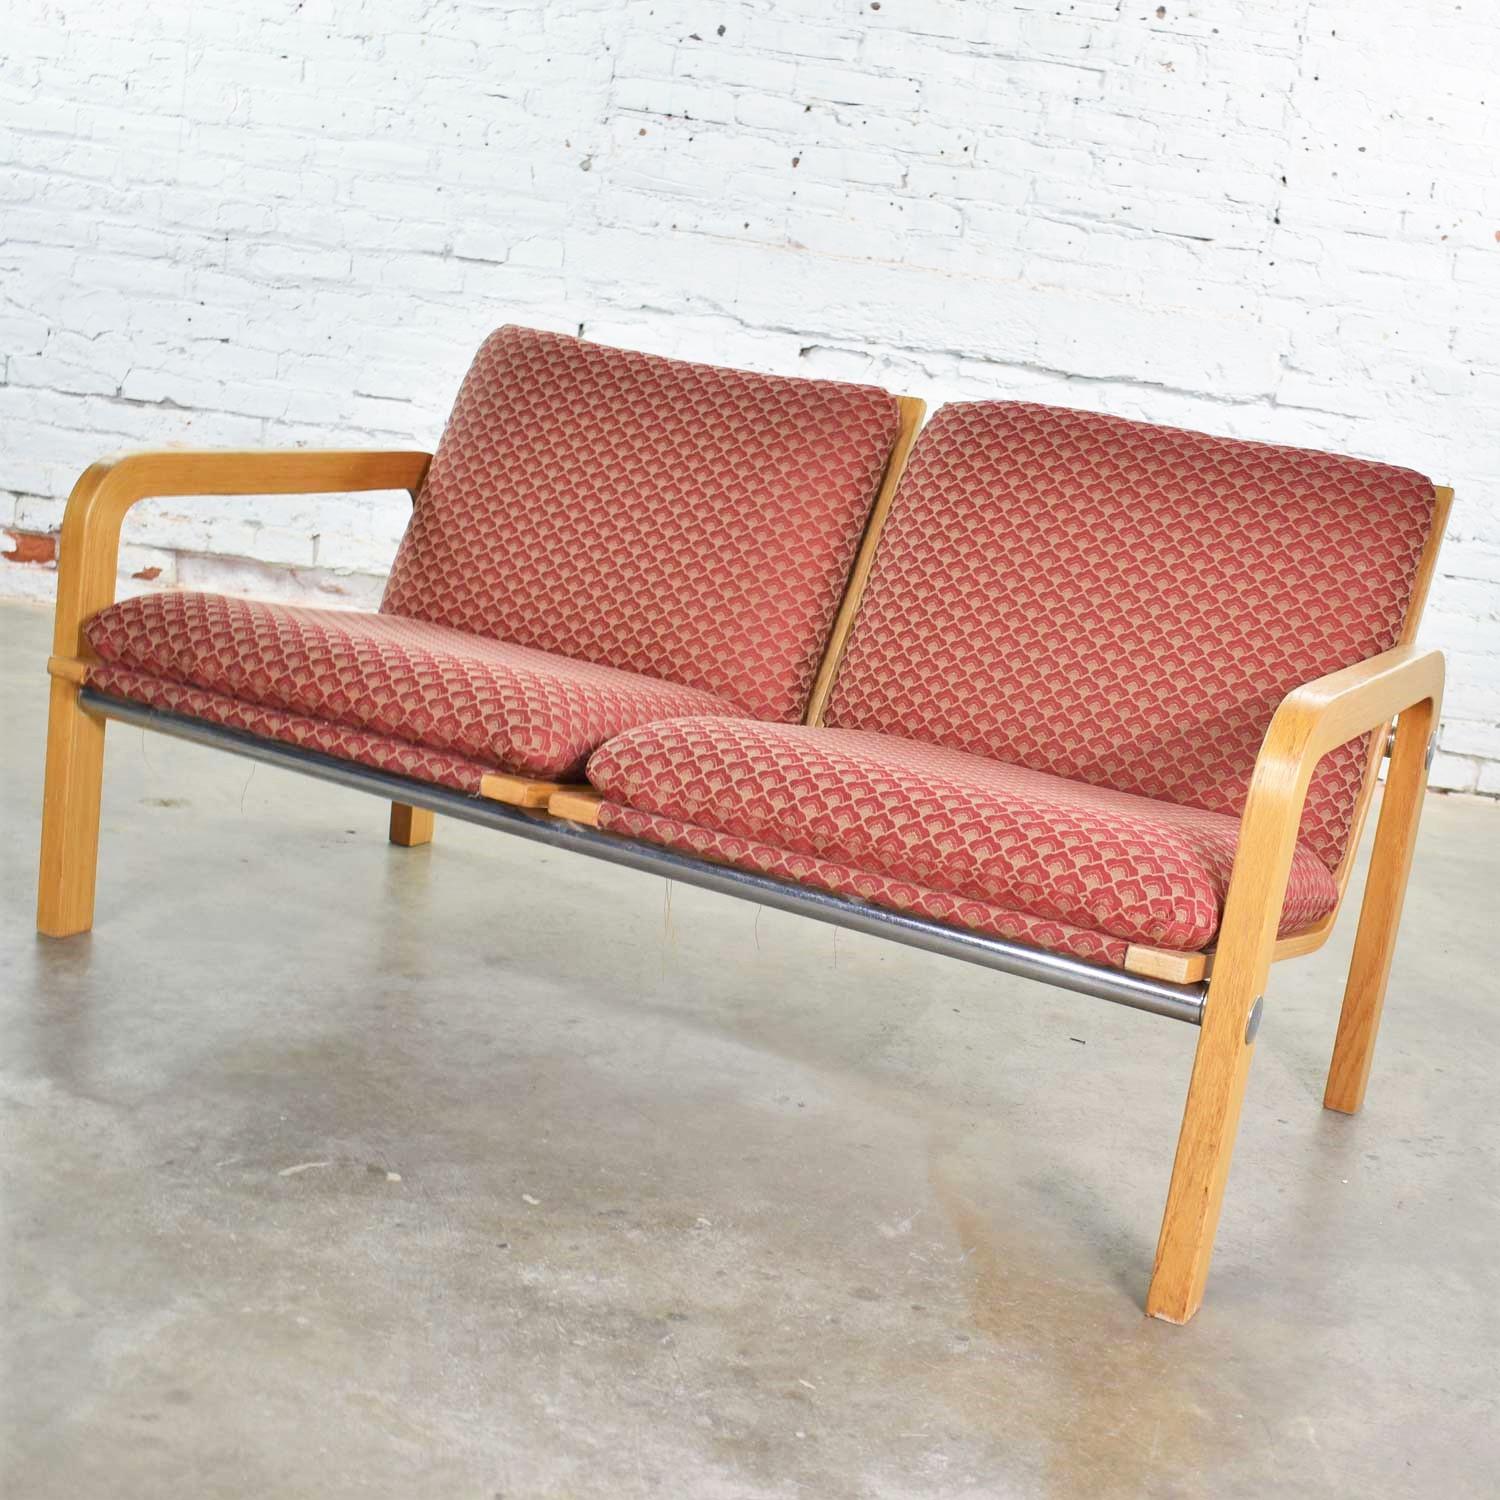 20th Century Vintage Modern Oak Bentwood & Chrome Two-Seat Settee or Bench Attr to Thonet  For Sale